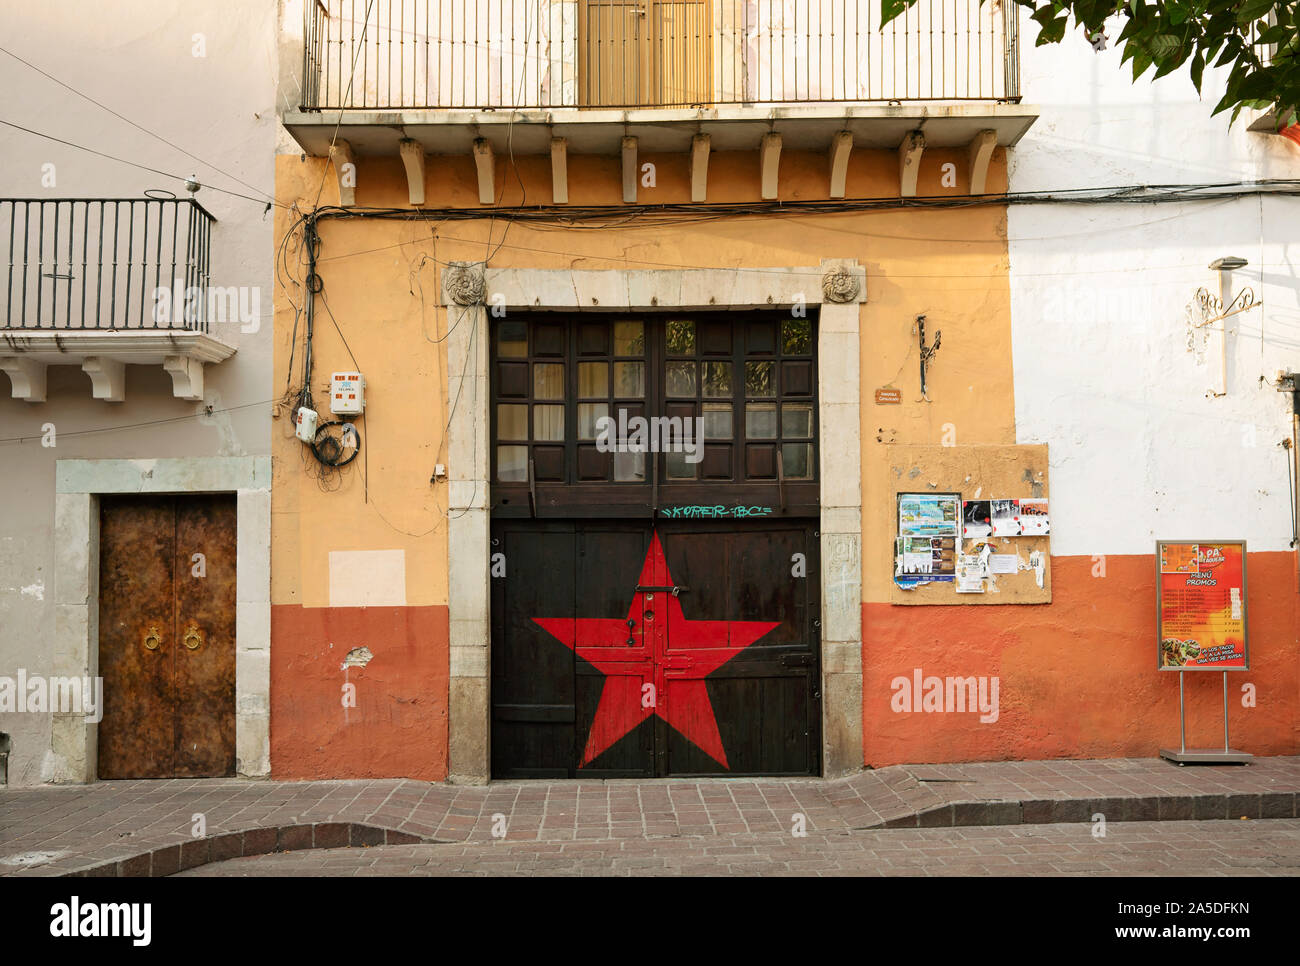 Painted facade of building with Red star painted on door. Manuel Doblado street, Guanajuato, Mexico. Jun 2019 Stock Photo